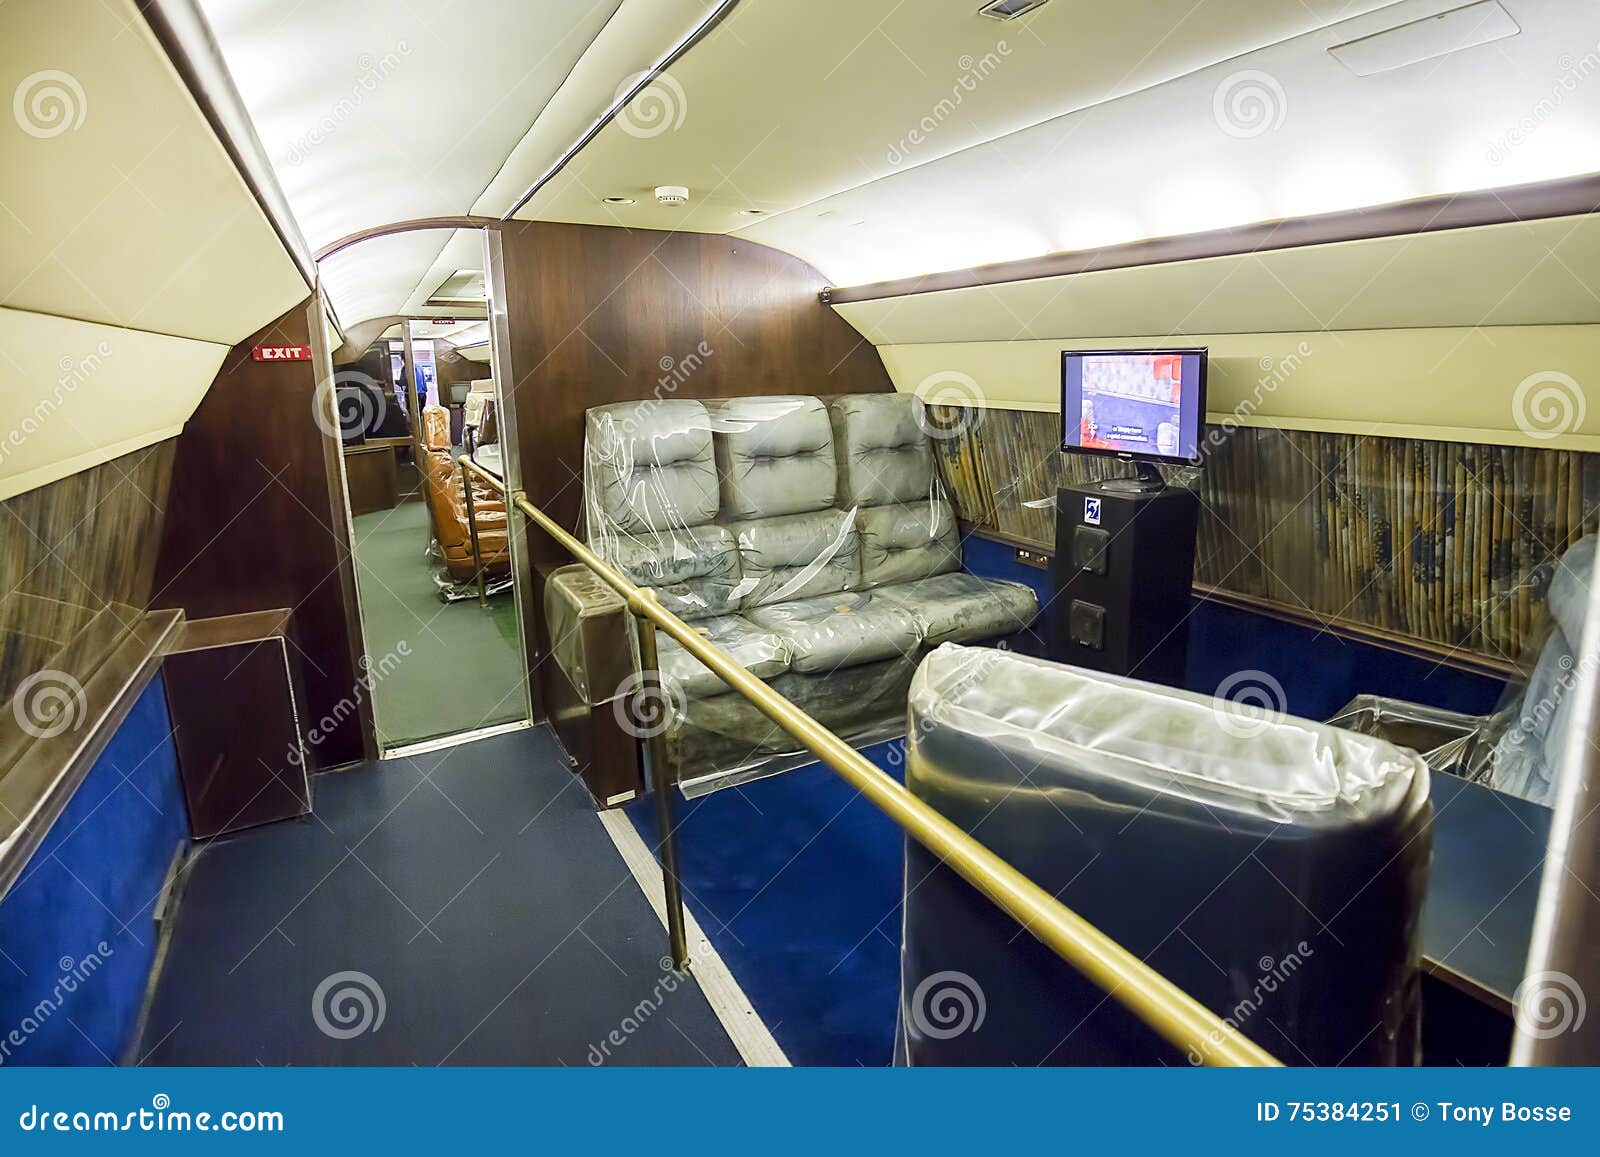 Elvis Presleys Private Airplane Lounge Area Editorial Photo - Image of